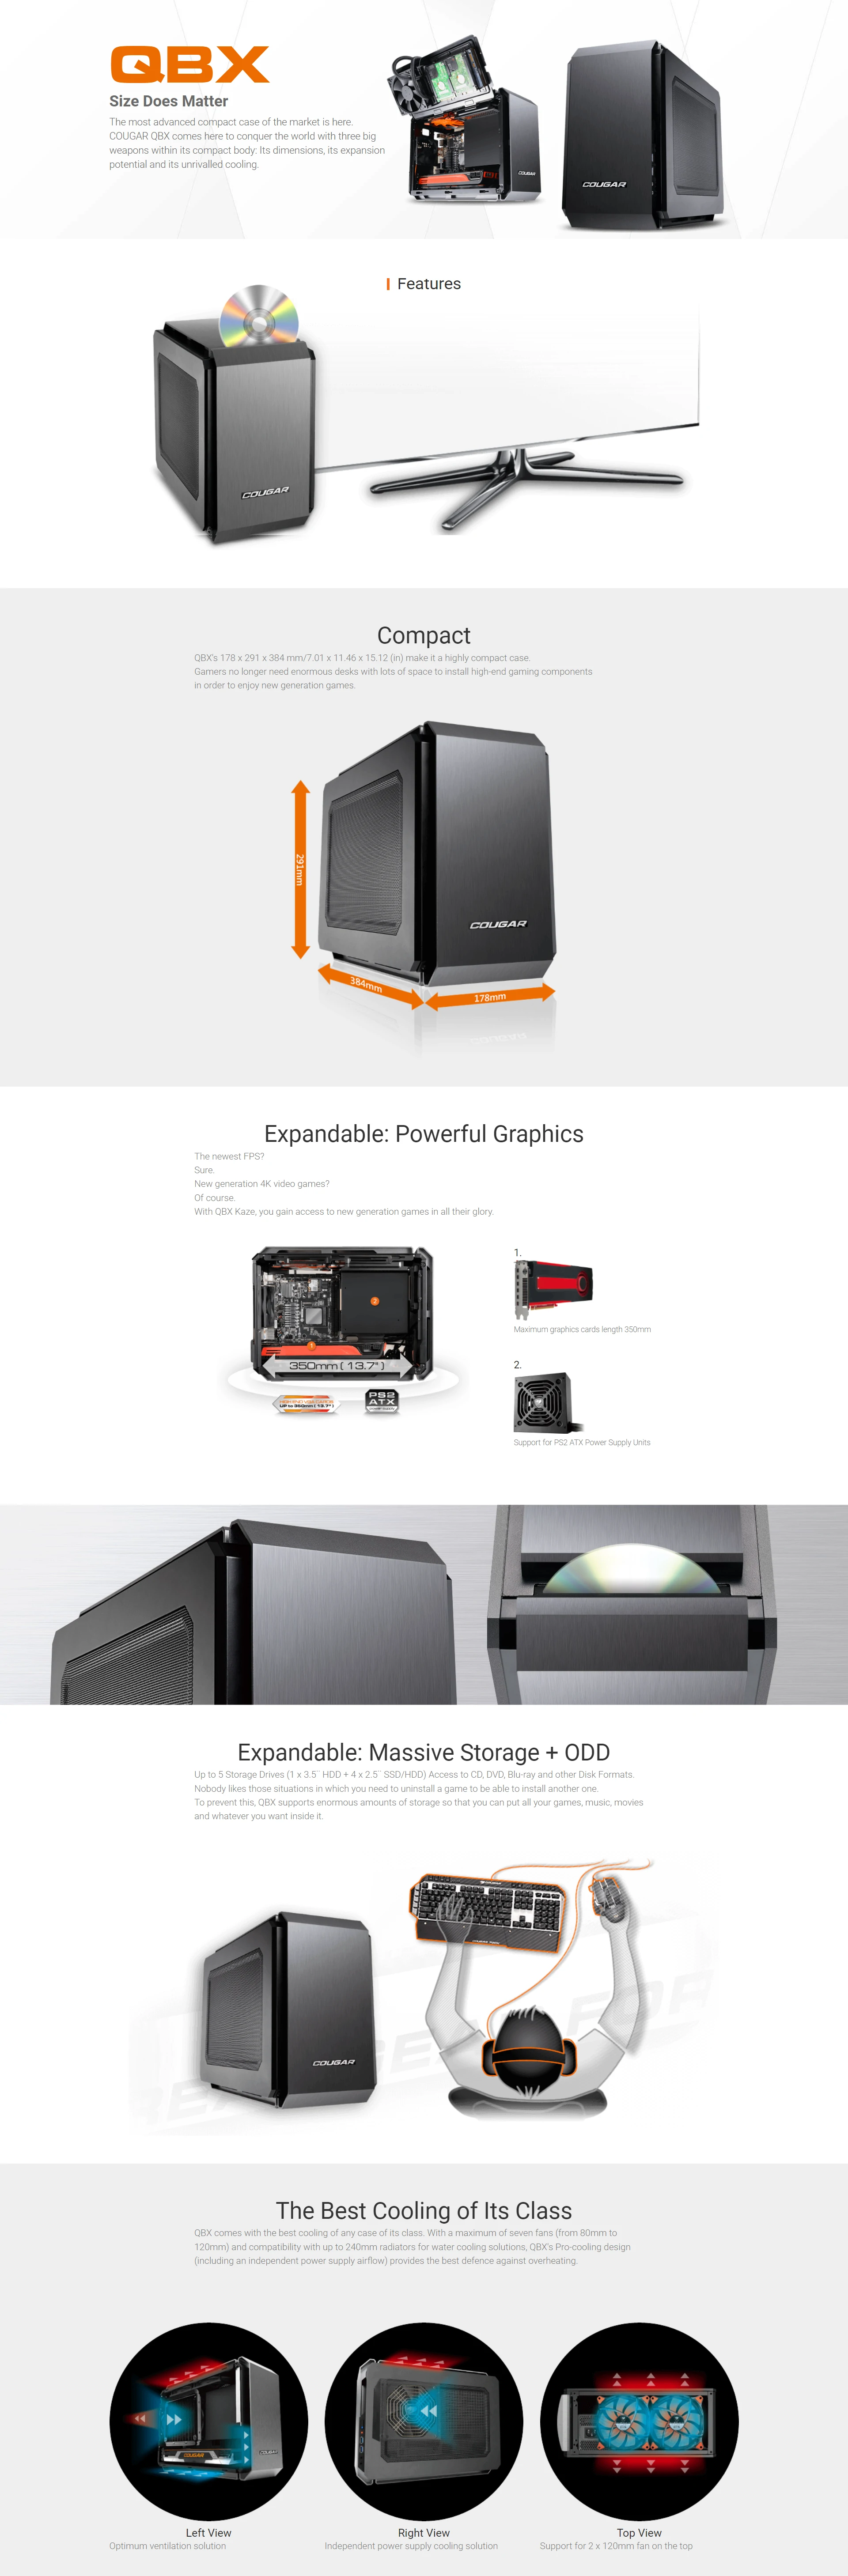 Overview - Cougar - QBX - Ultra Compact Pro Gaming Mini-ITX Case